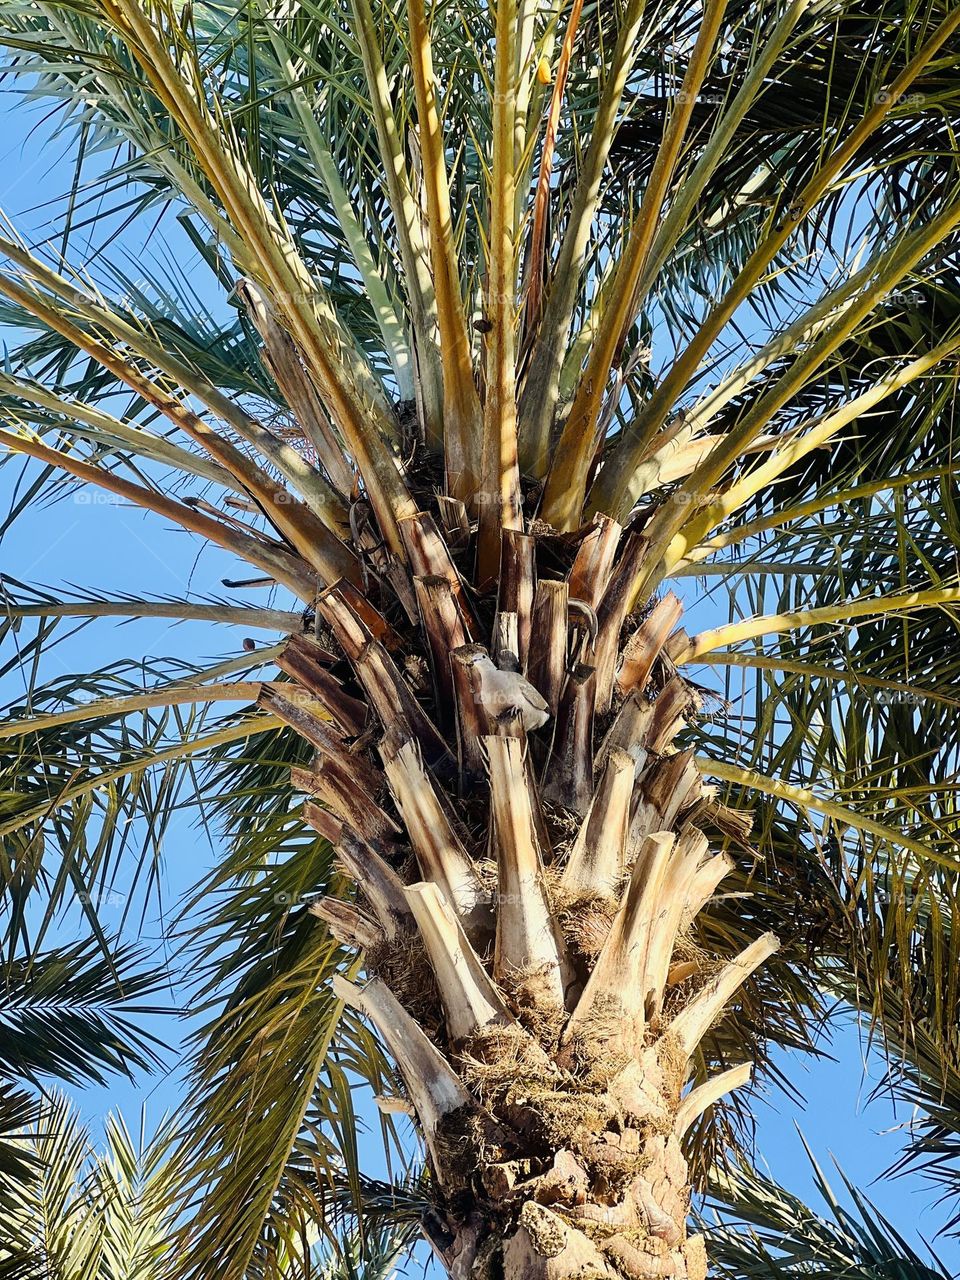 The dove roosting in the fronds of a large palm tree. Bright blue sky looking up at the dove presiding over us.